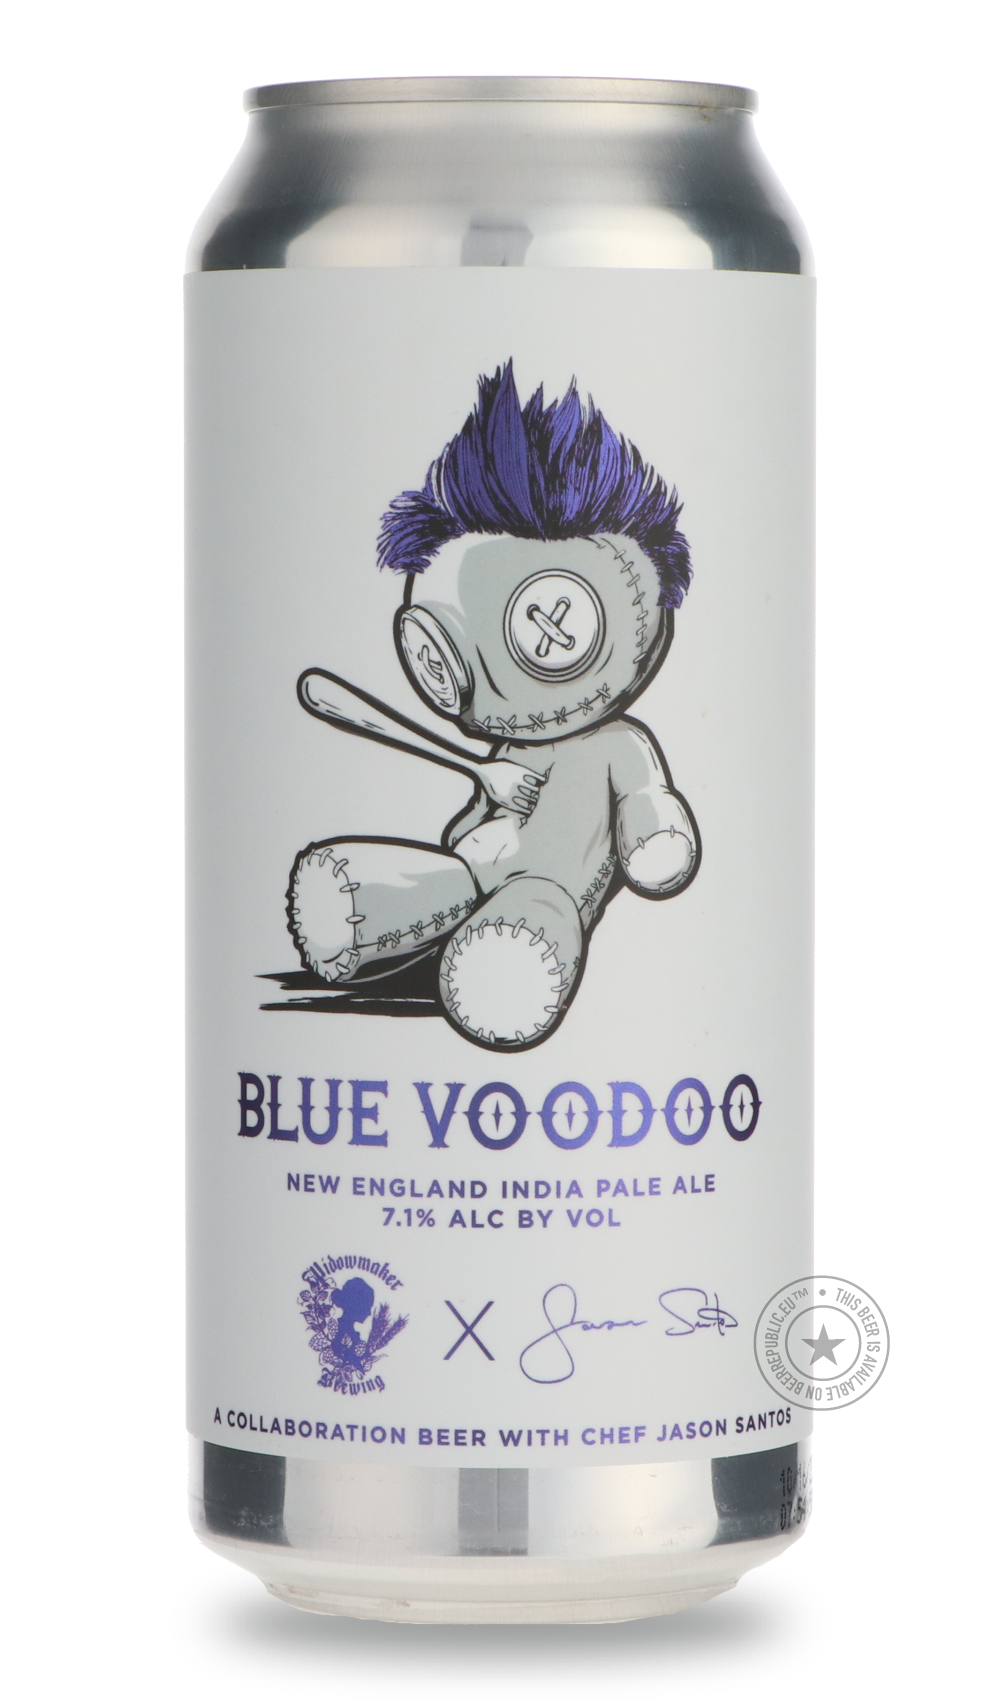 -Widowmaker- Blue Voodoo-IPA- Only @ Beer Republic - The best online beer store for American & Canadian craft beer - Buy beer online from the USA and Canada - Bier online kopen - Amerikaans bier kopen - Craft beer store - Craft beer kopen - Amerikanisch bier kaufen - Bier online kaufen - Acheter biere online - IPA - Stout - Porter - New England IPA - Hazy IPA - Imperial Stout - Barrel Aged - Barrel Aged Imperial Stout - Brown - Dark beer - Blond - Blonde - Pilsner - Lager - Wheat - Weizen - Amber - Barley W